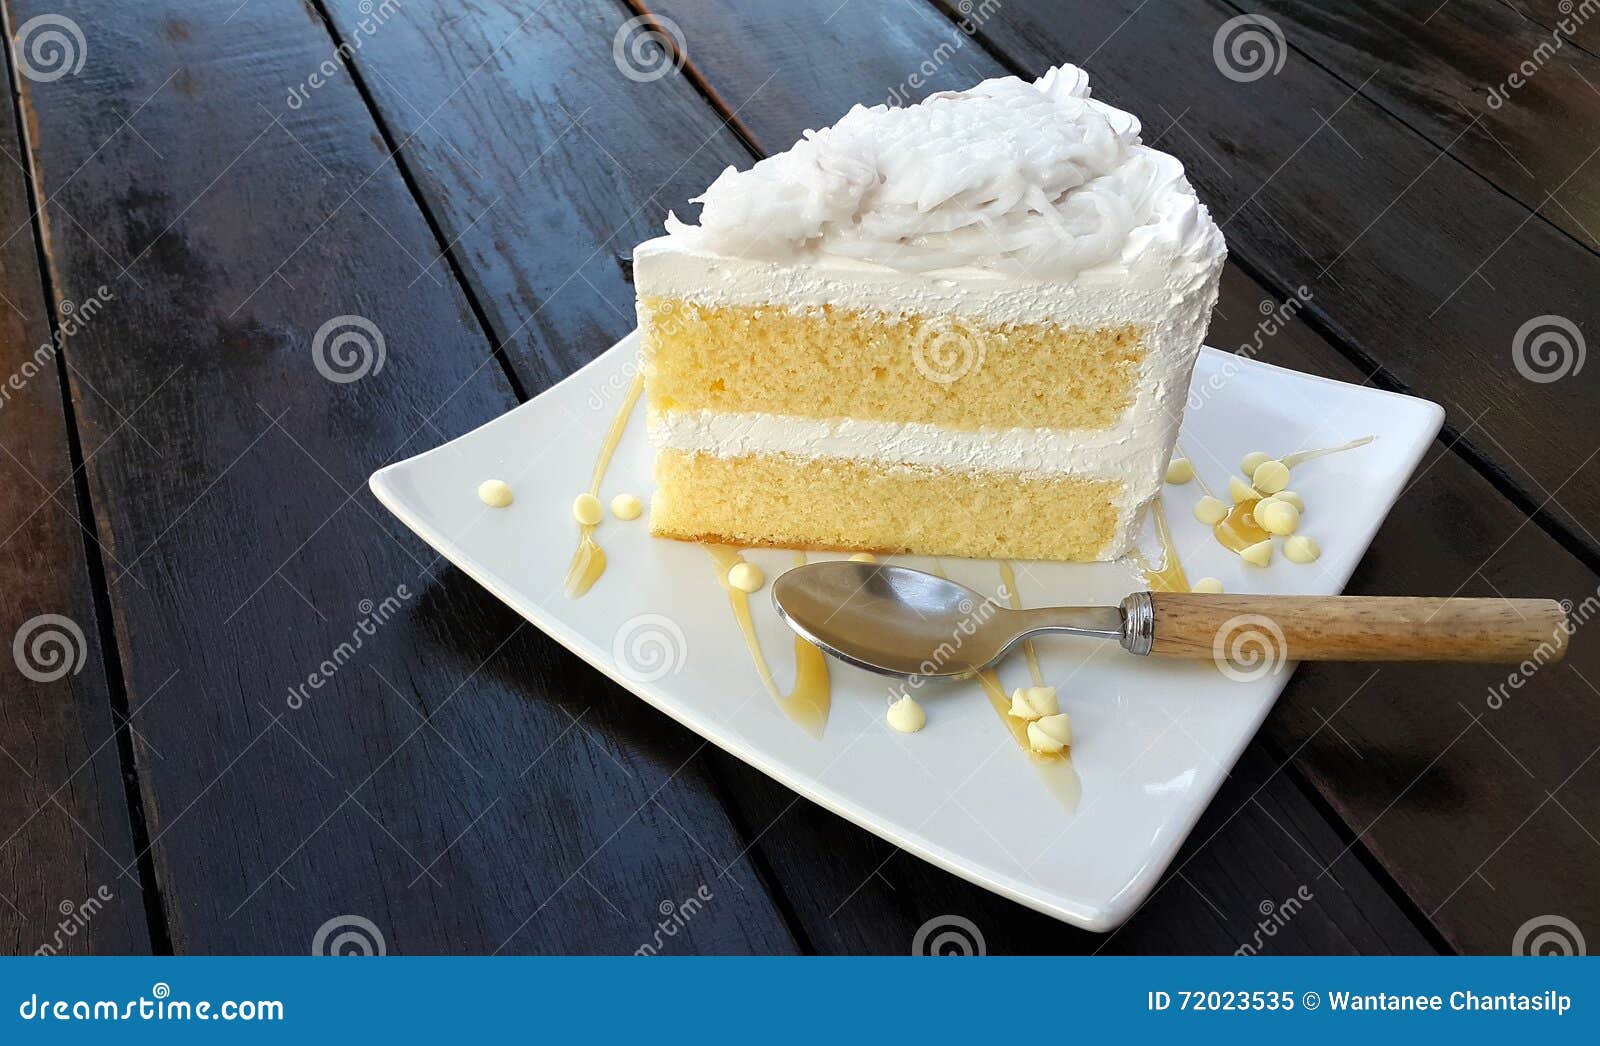 Image result for icing cake piece with spoon